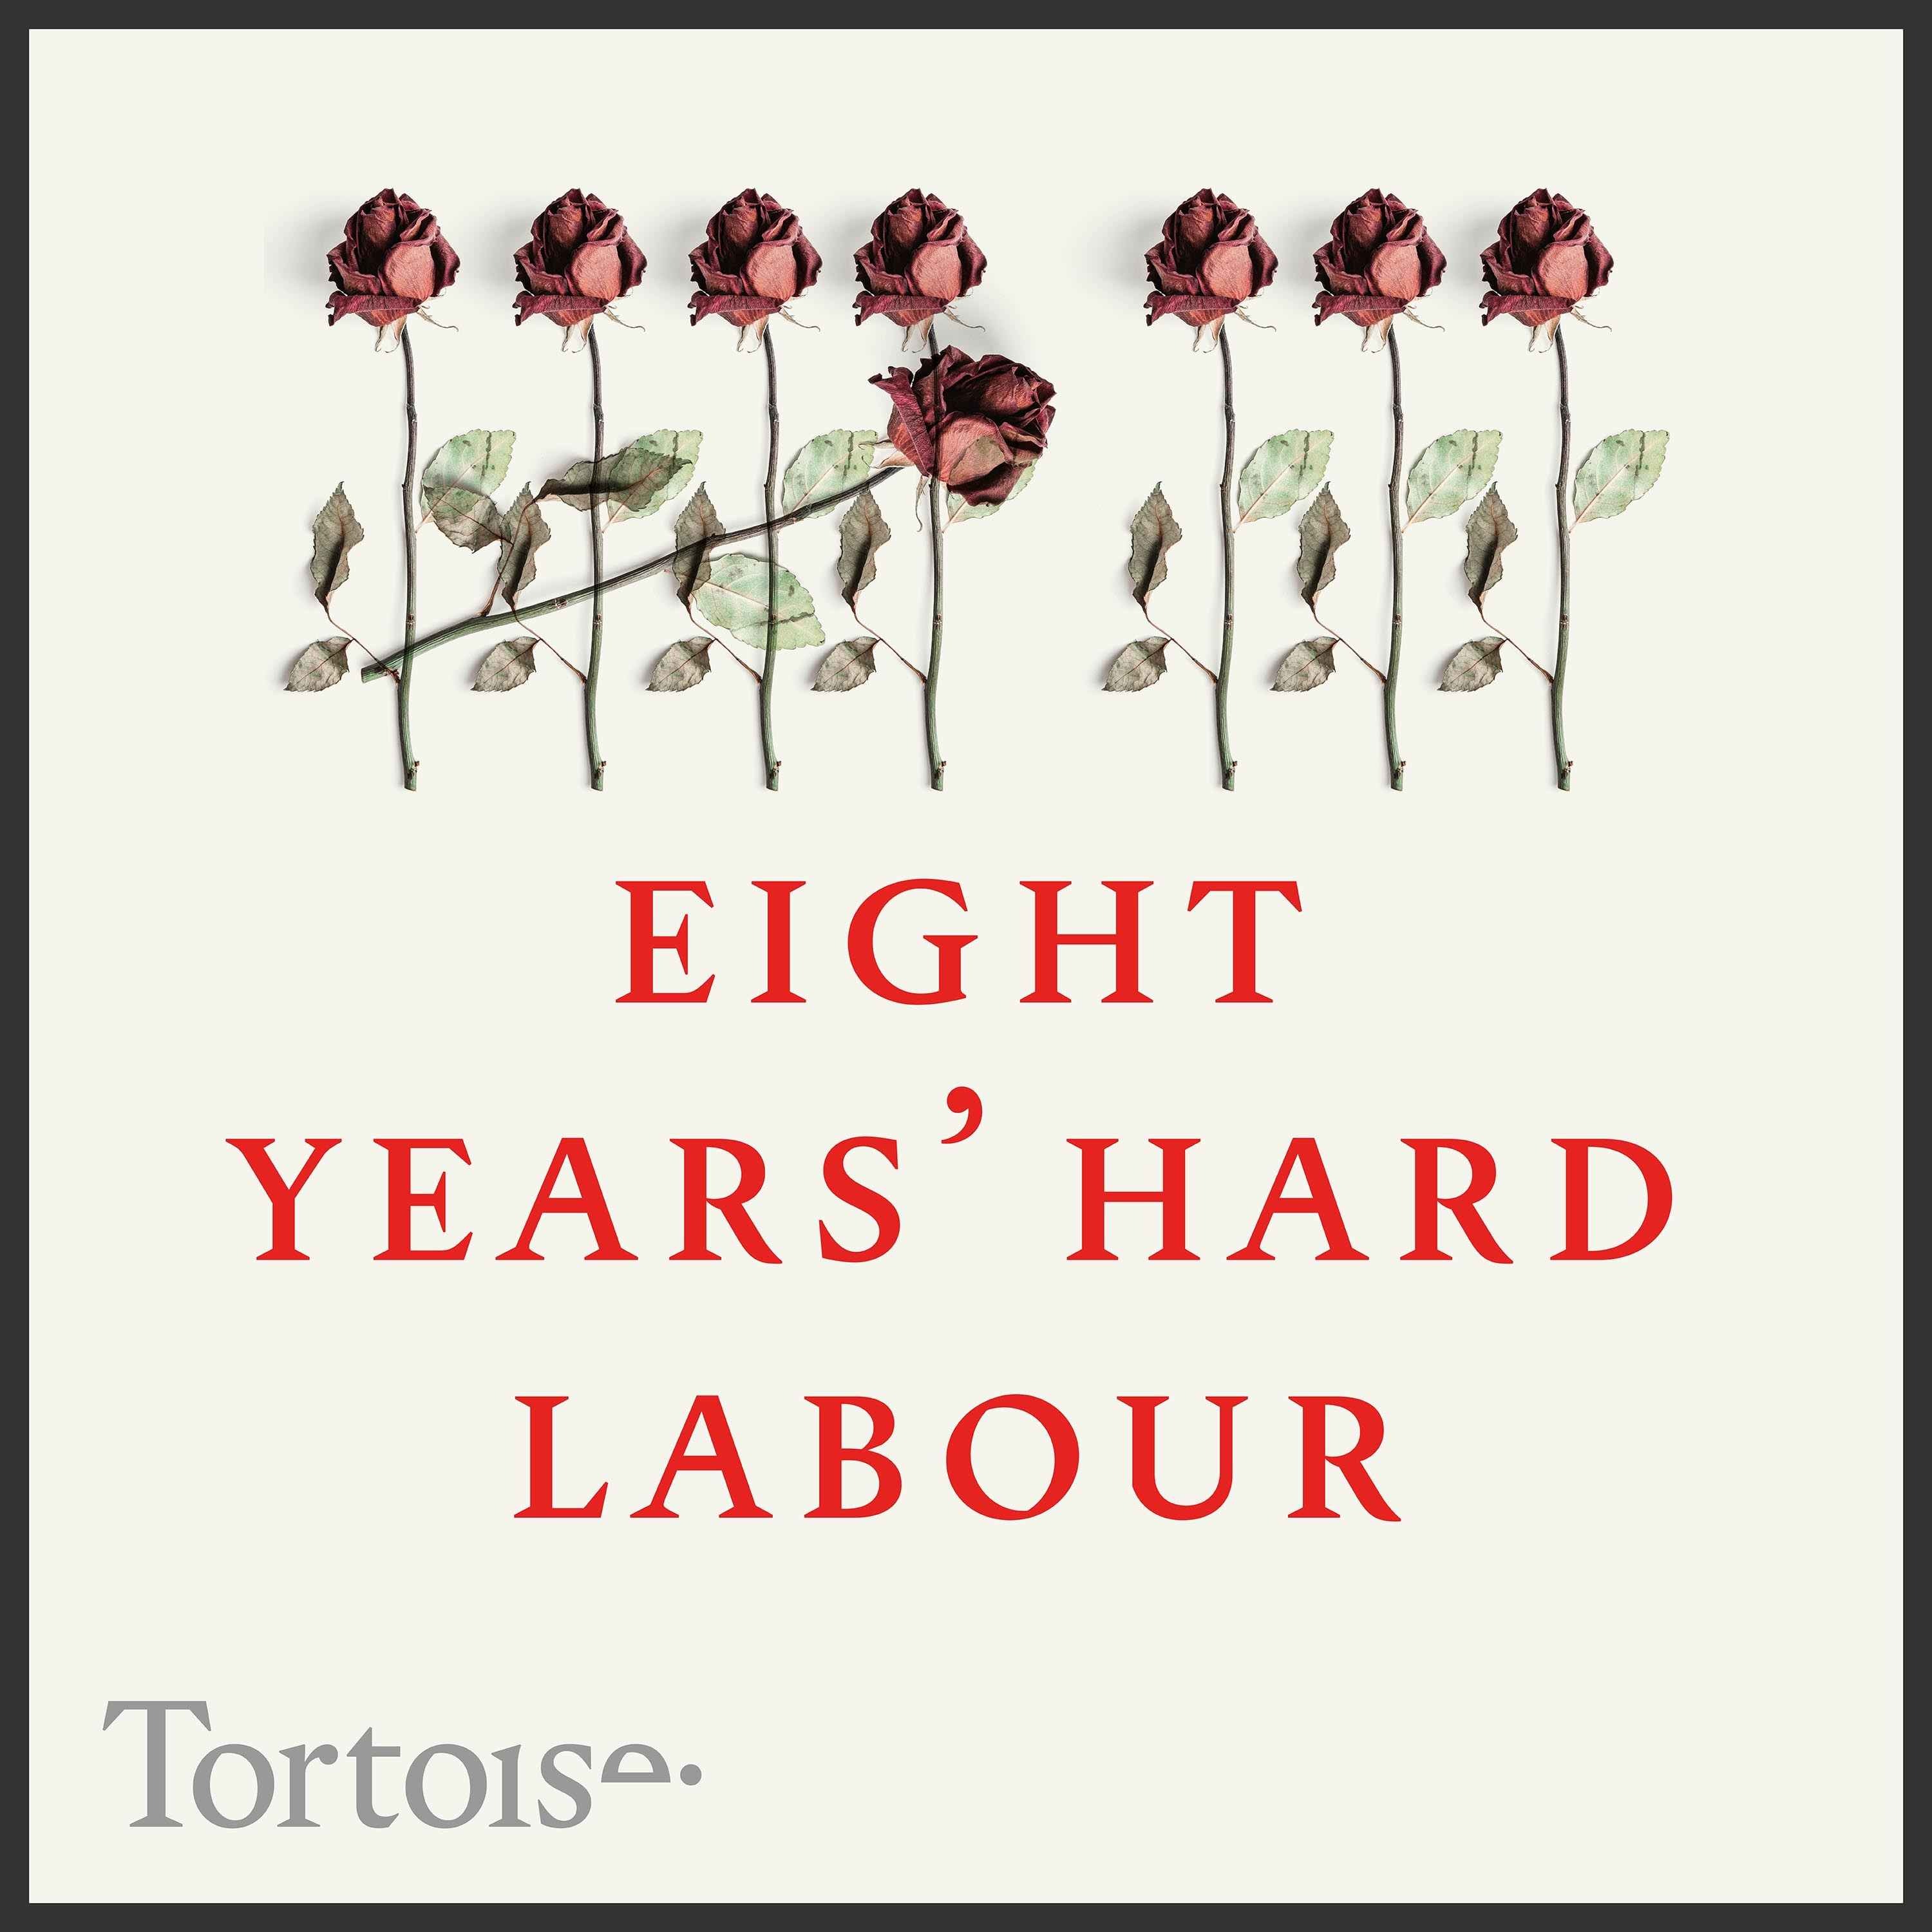 Eight years hard Labour: episode 6 - Do you really want to go out on a knight like this?